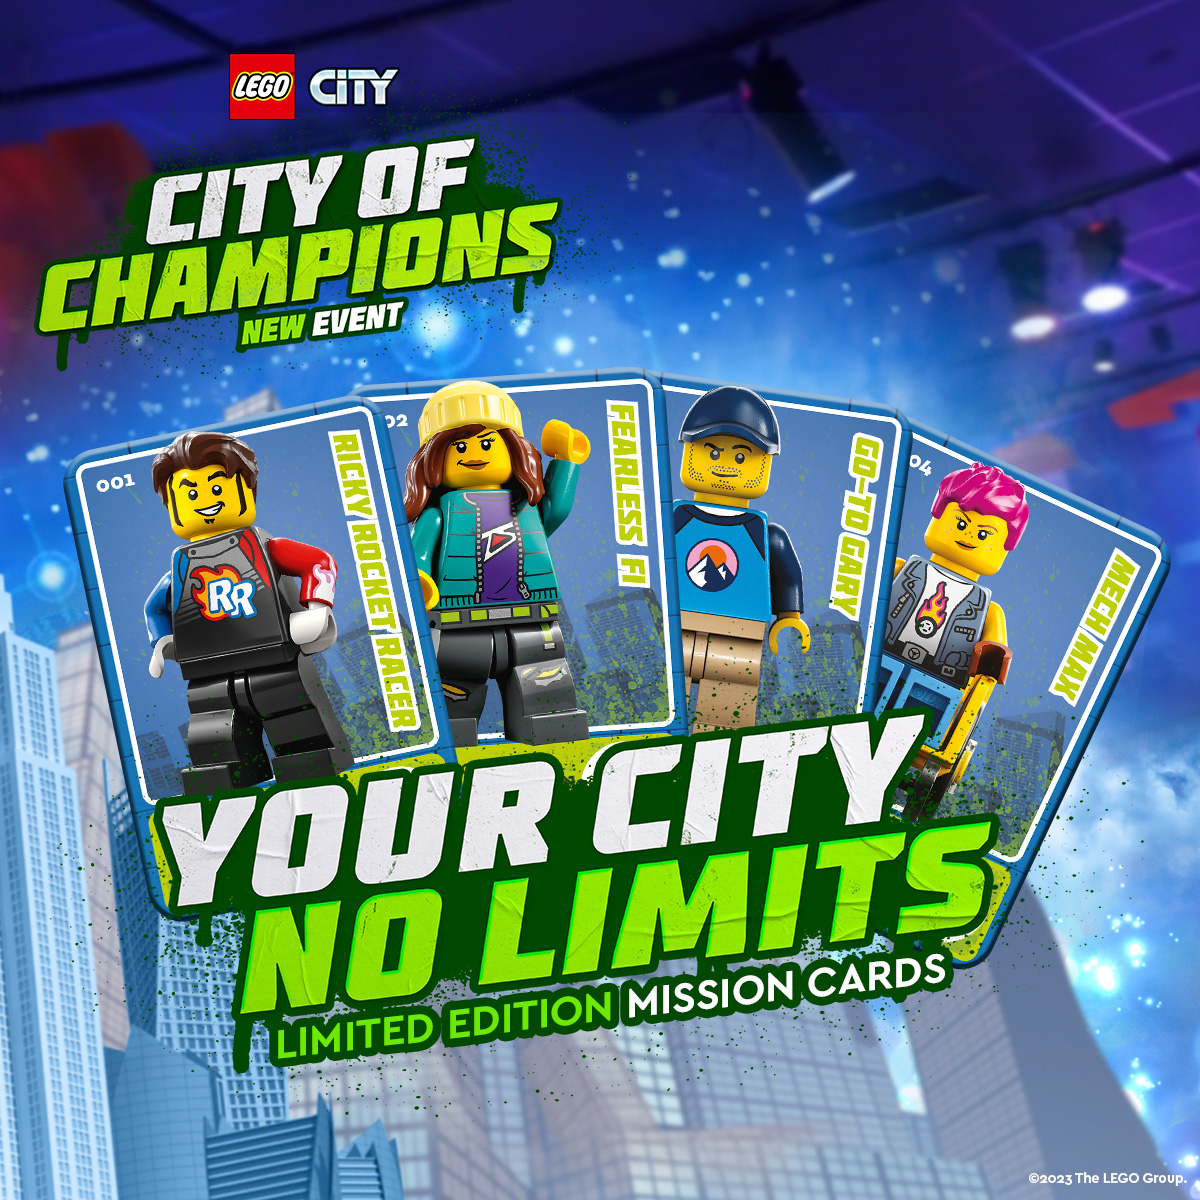 LEGO City of Champions Trading Cards